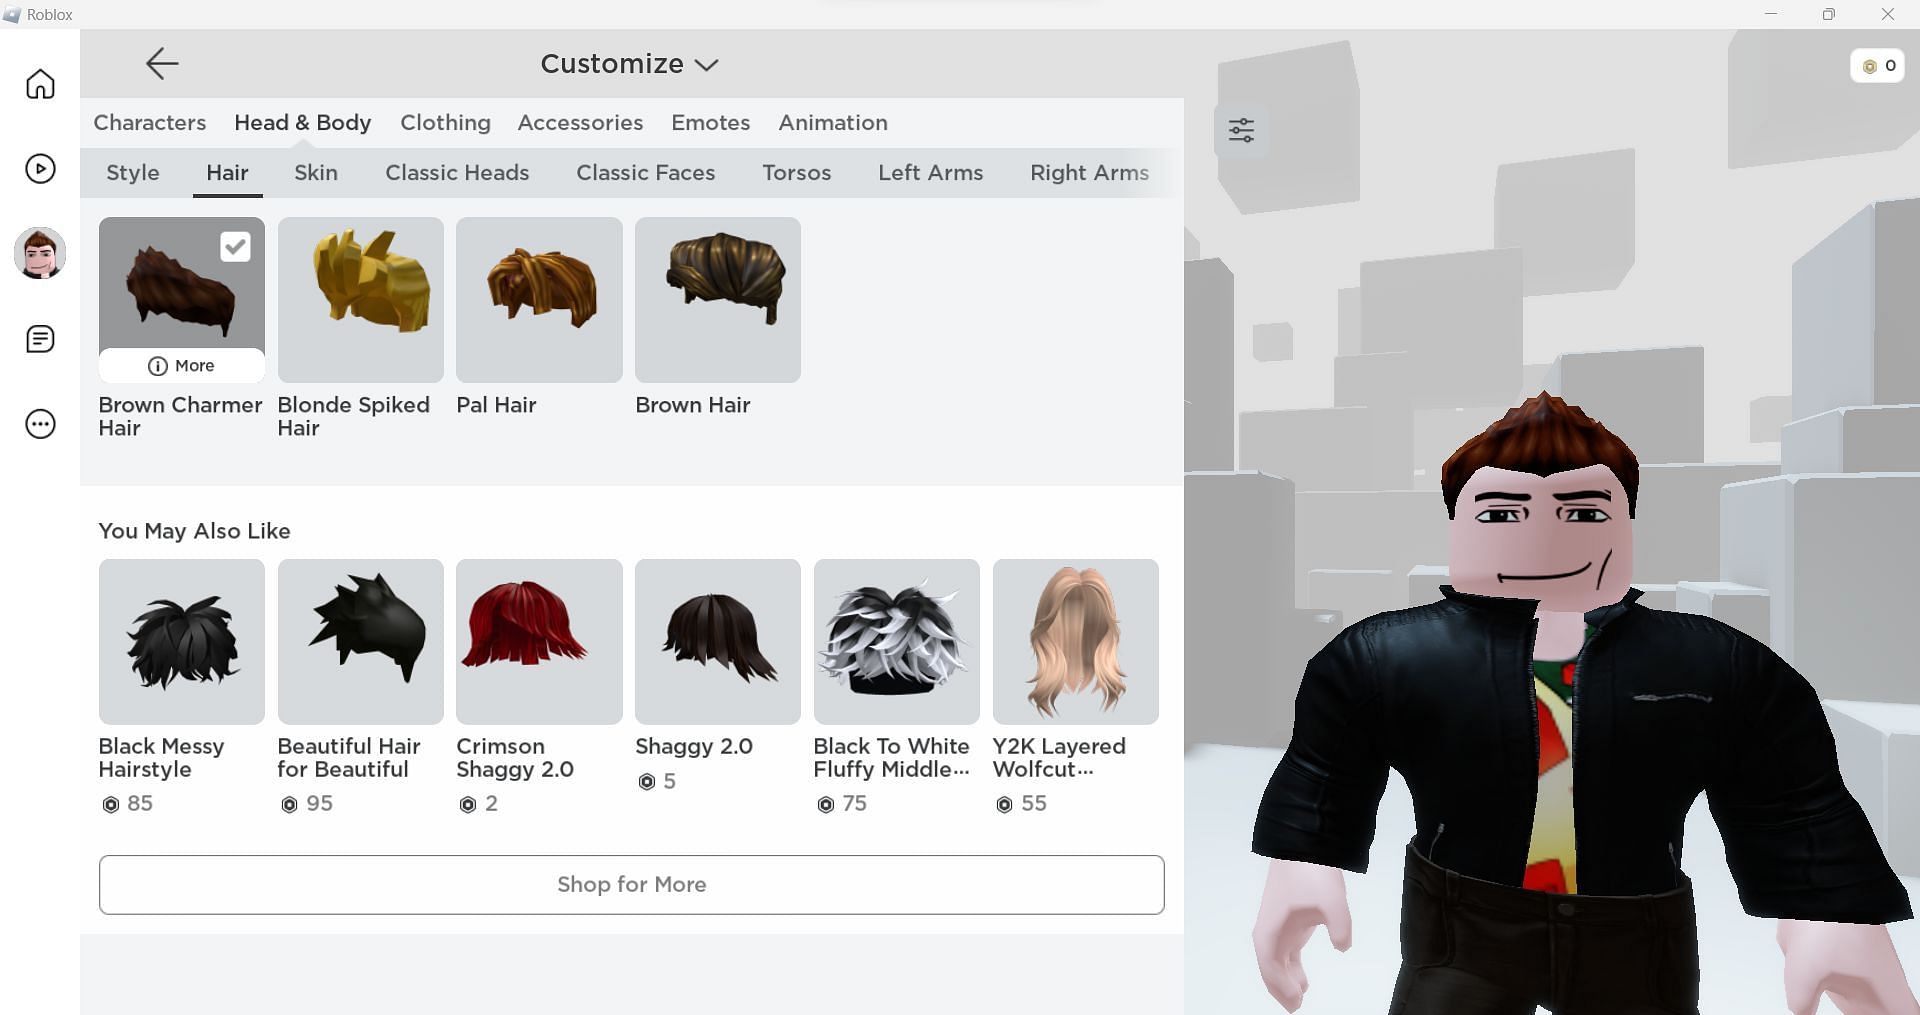 Roblox avatar – how to customise your character